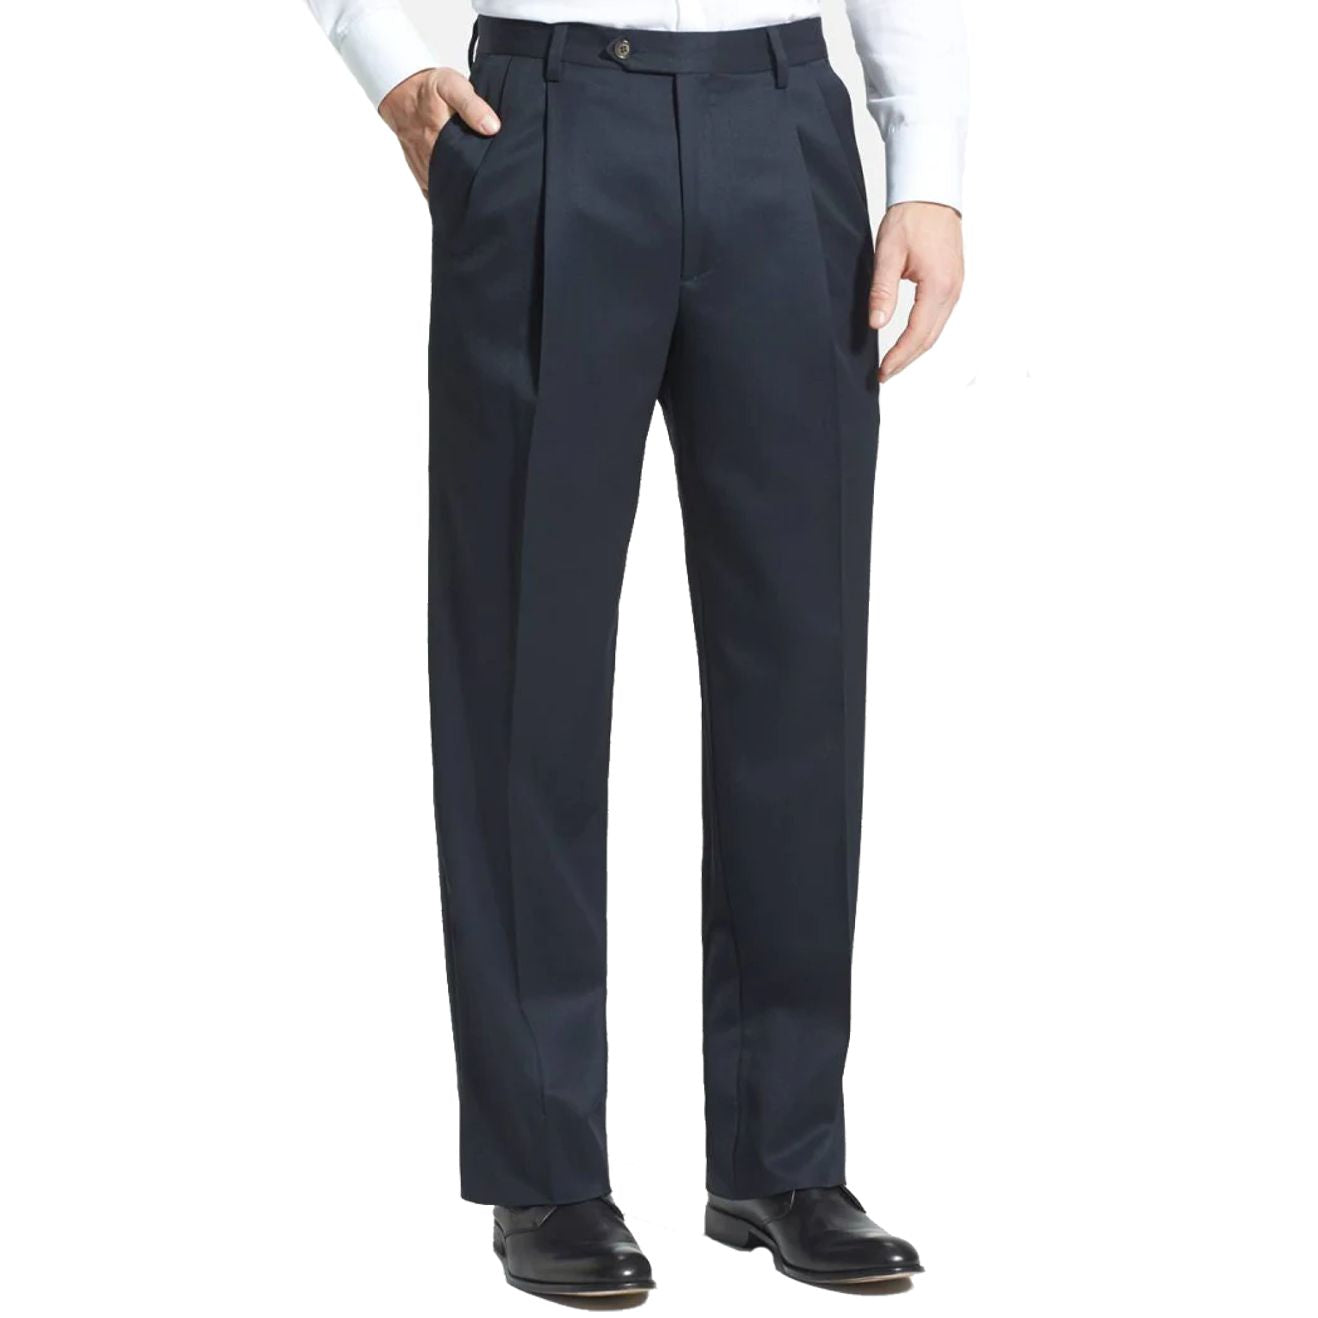 Super 100s Worsted Wool Gabardine Trouser in Navy (Milan Double Reverse Pleated Fit - Regular & Long Rise) by Berle